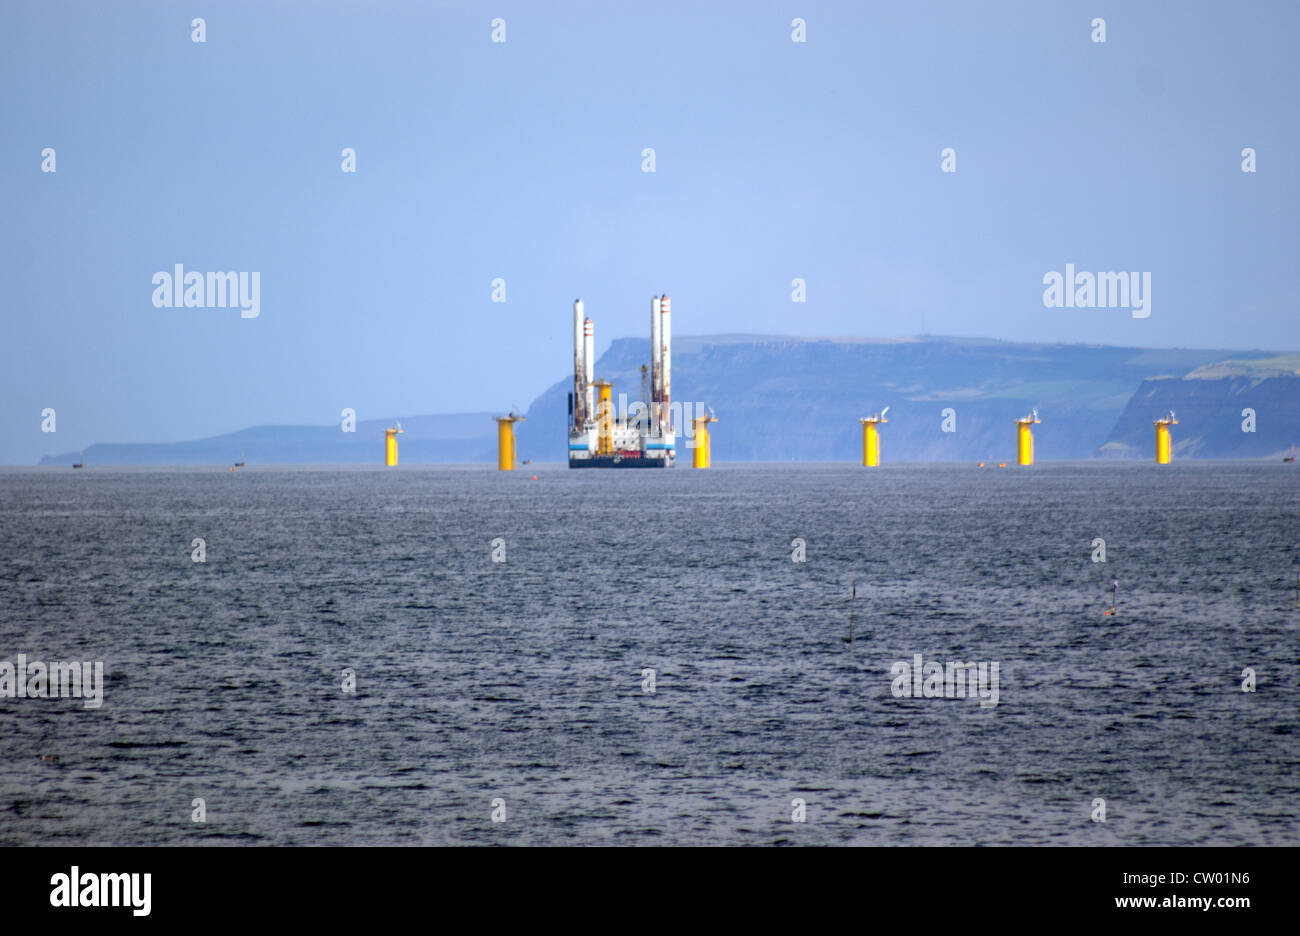 SHIP ERECTING AND INSTALLING WIND TURBINES OFFSHORE FARM IN THE SEA AT REDCAR Stock Photo